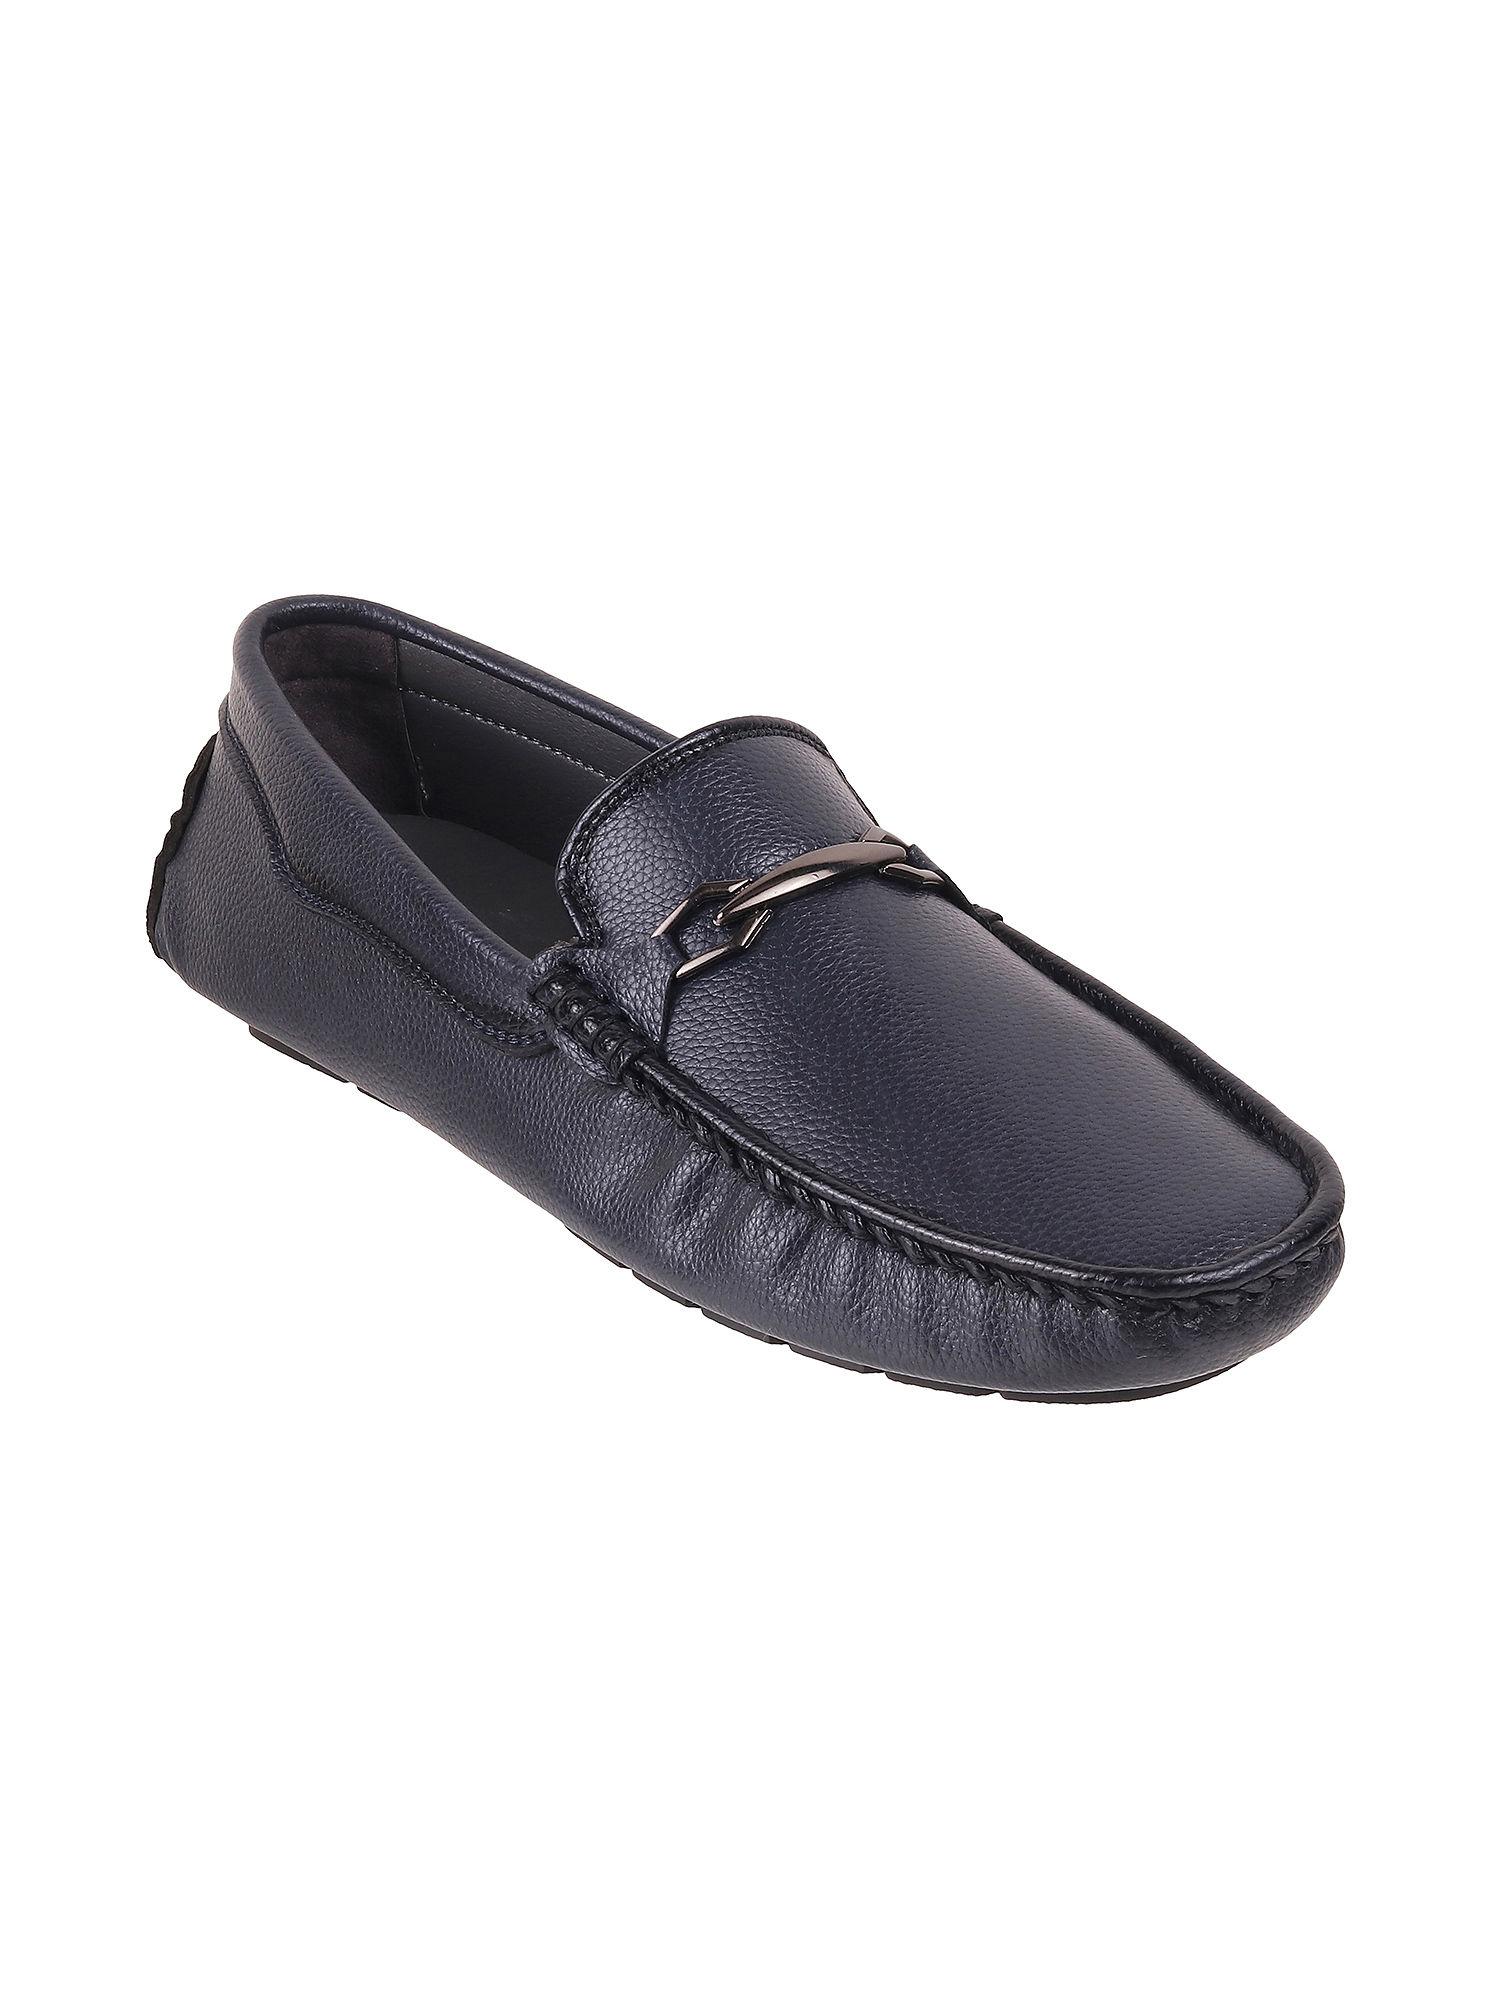 textured mens leather blue loafers